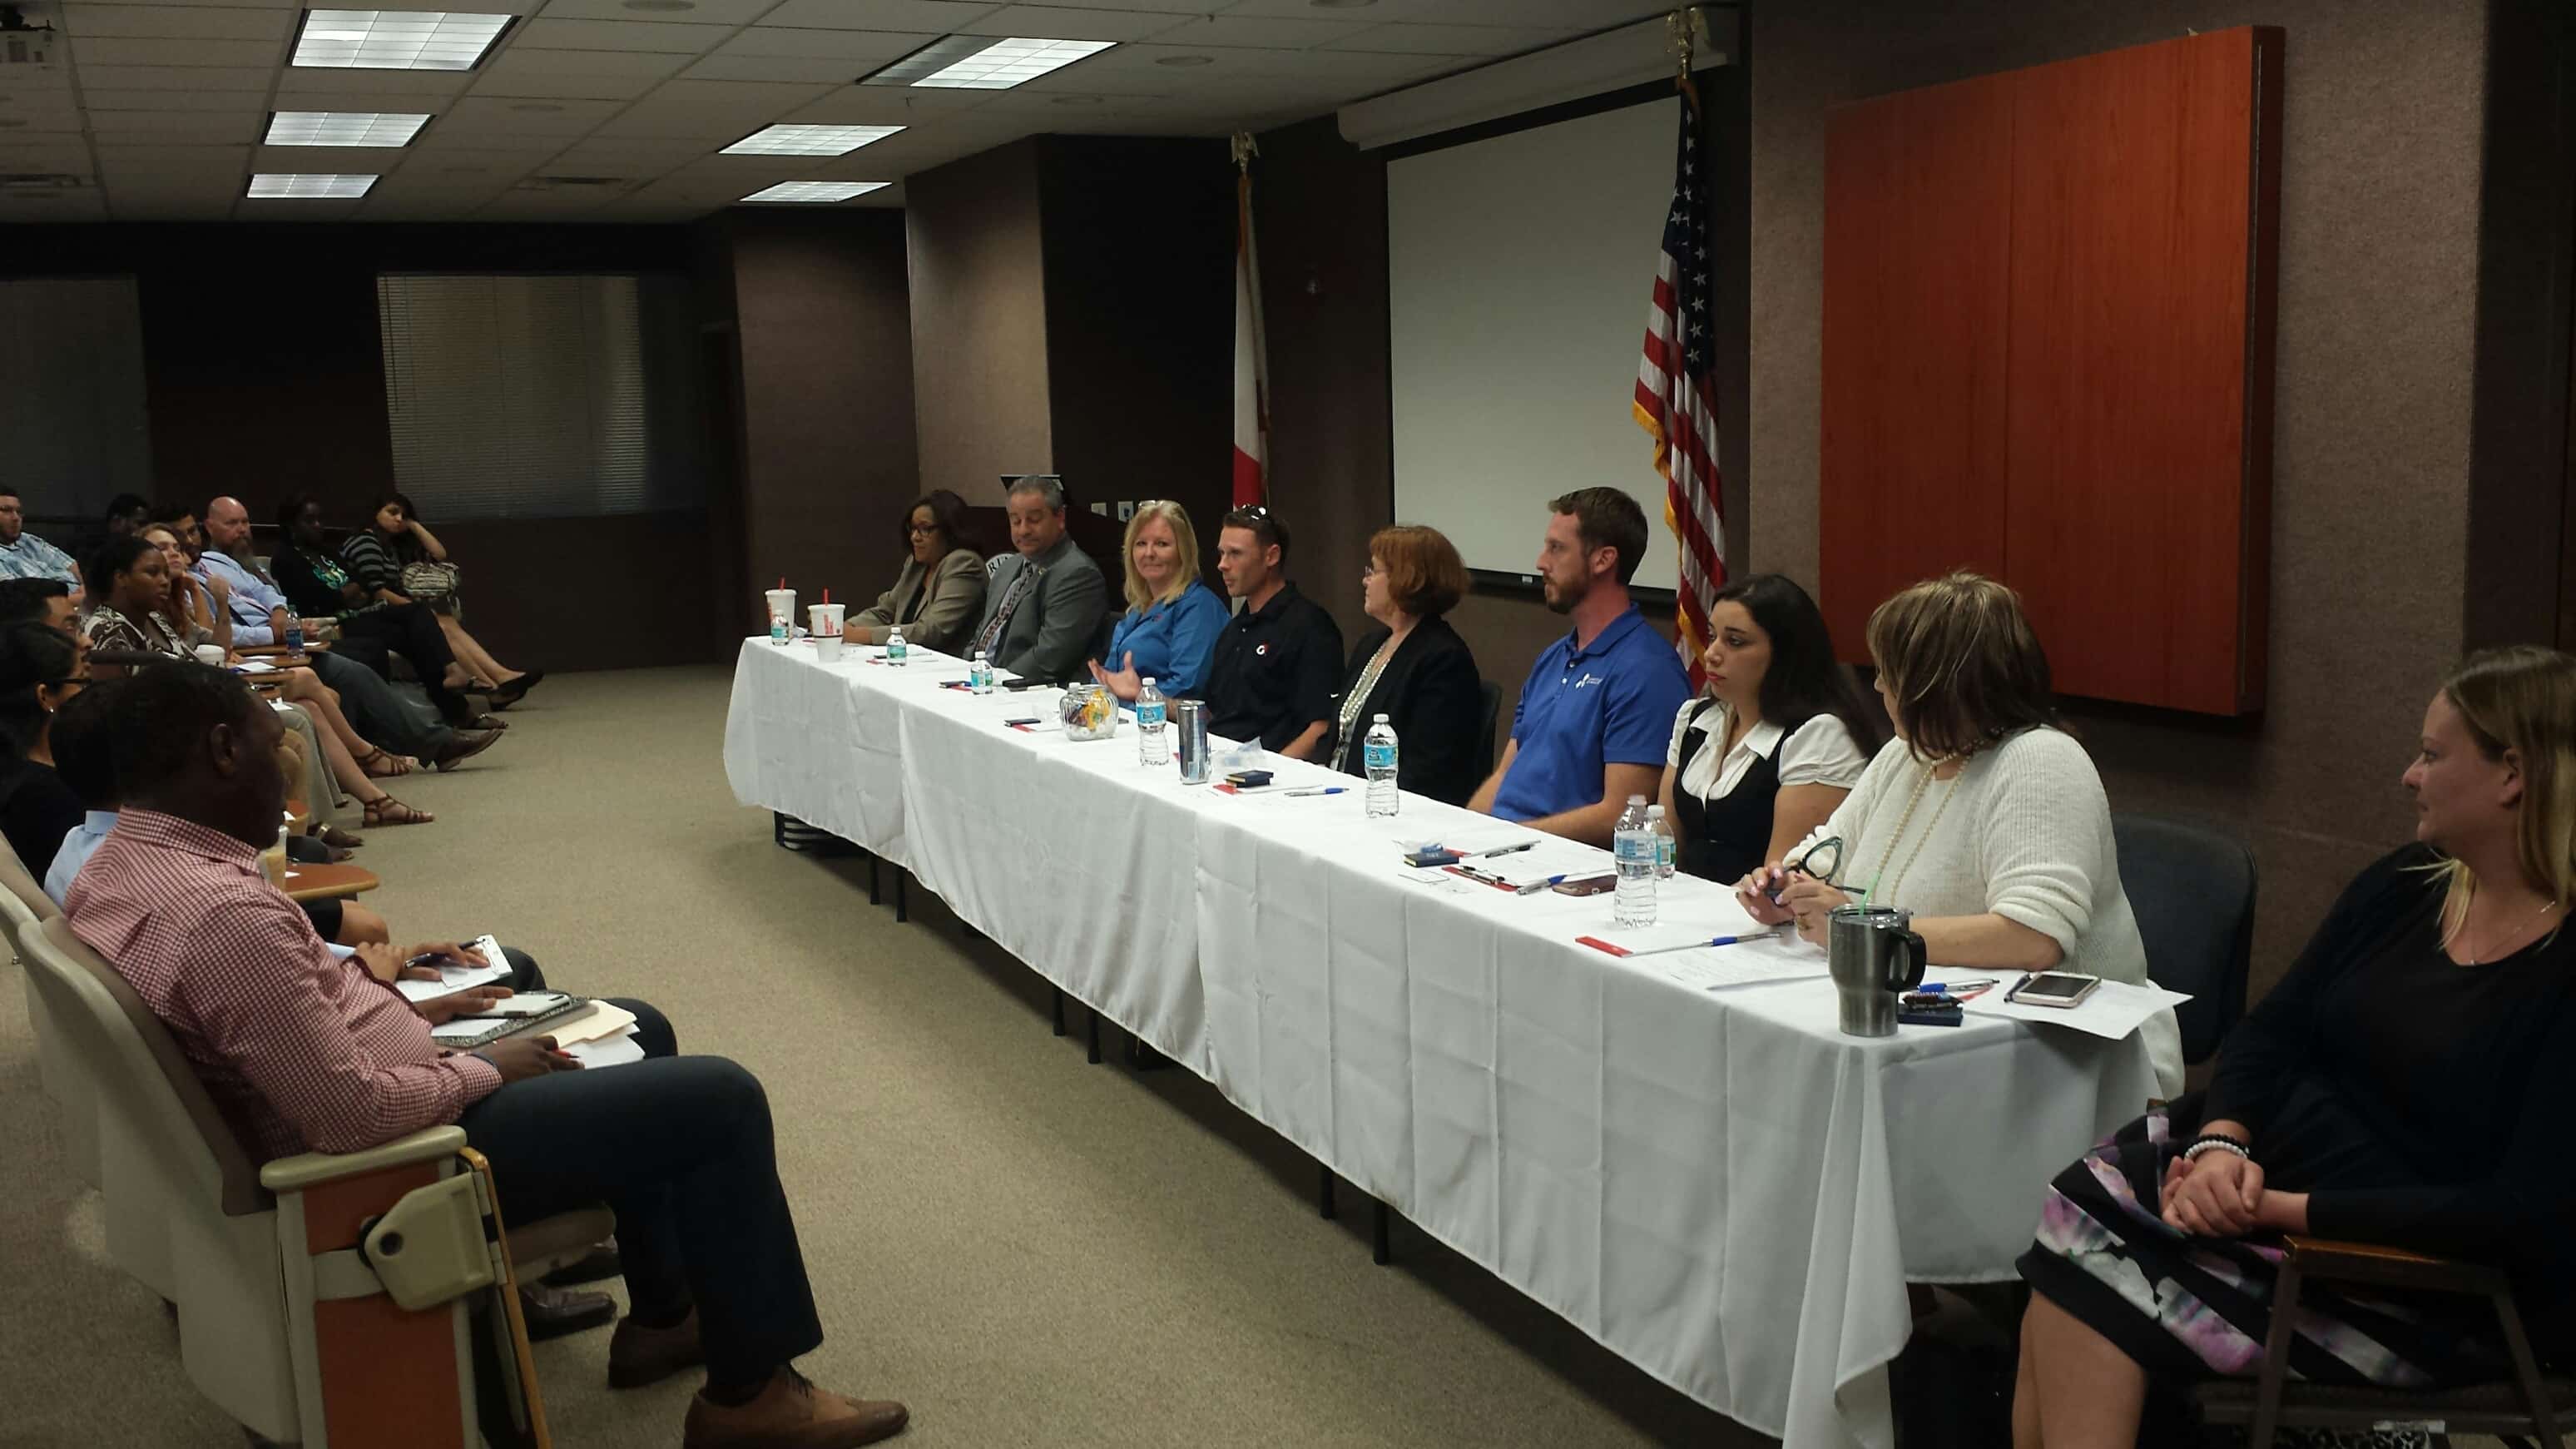 West Palm Beach Holds a Career Expo and Employer Panel Discussion